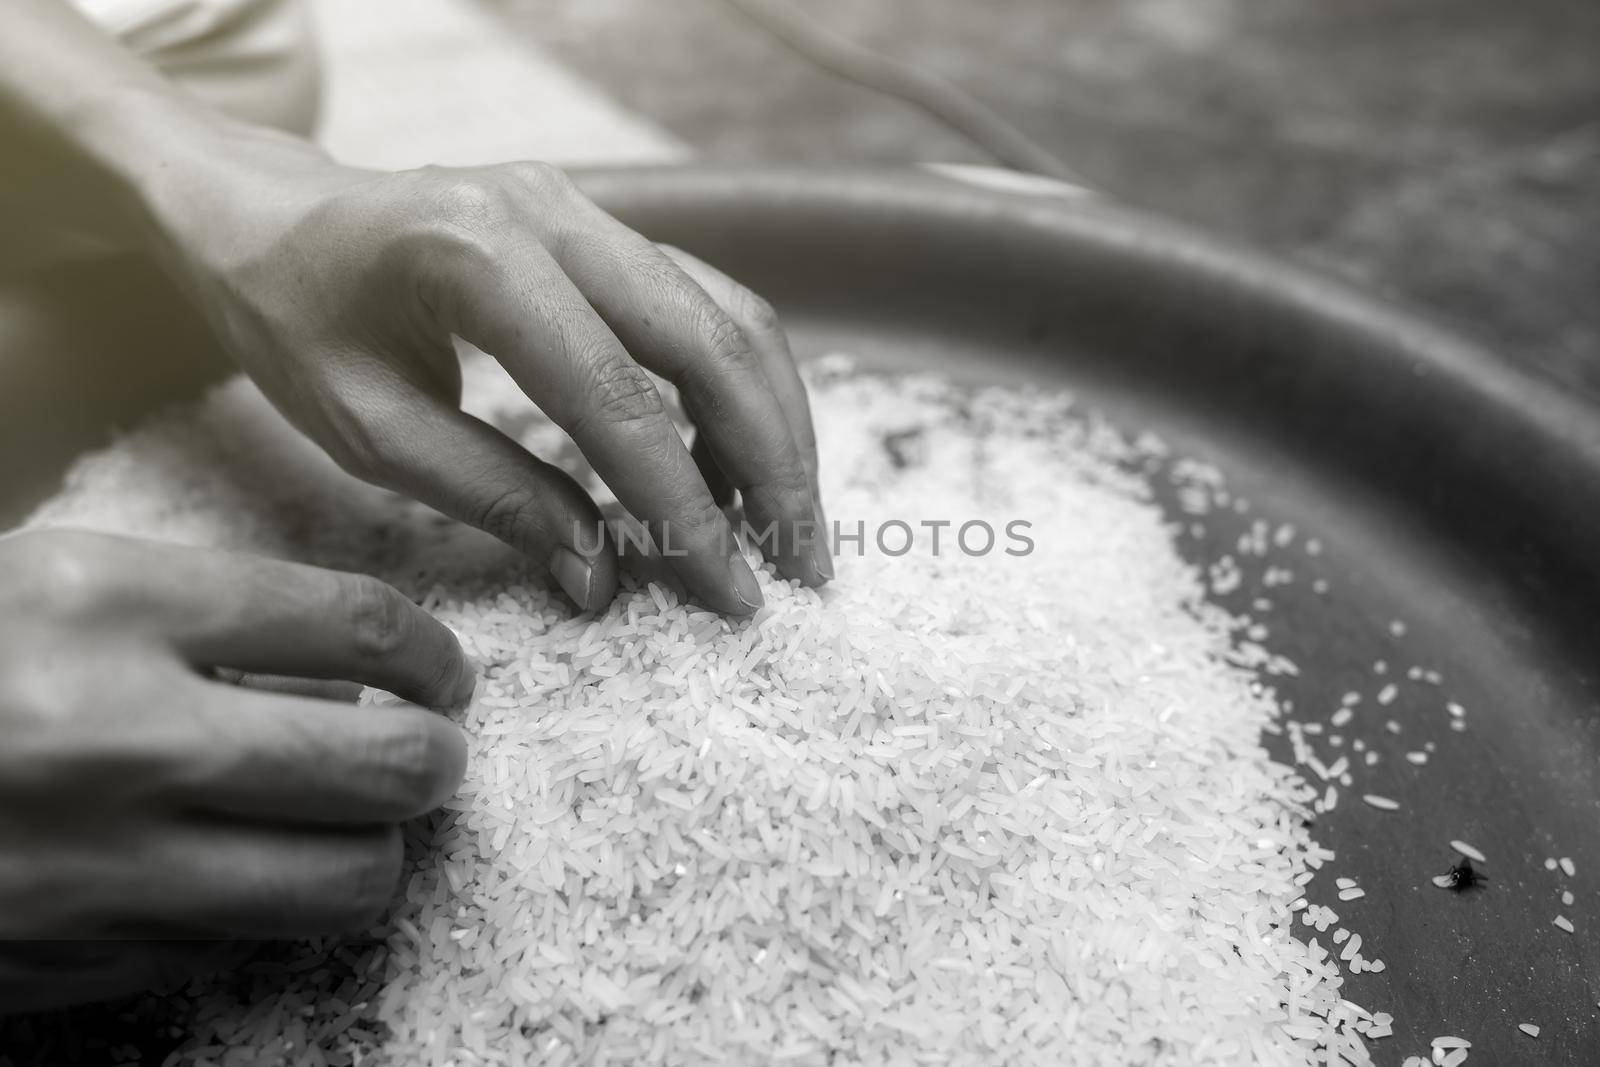 Global food crisis concept. Woman hand holding rice in plastic tray. Uncooked milled white rice. Poor and poverty concept. Human catastrophe in global food crisis effects of climate change and war.